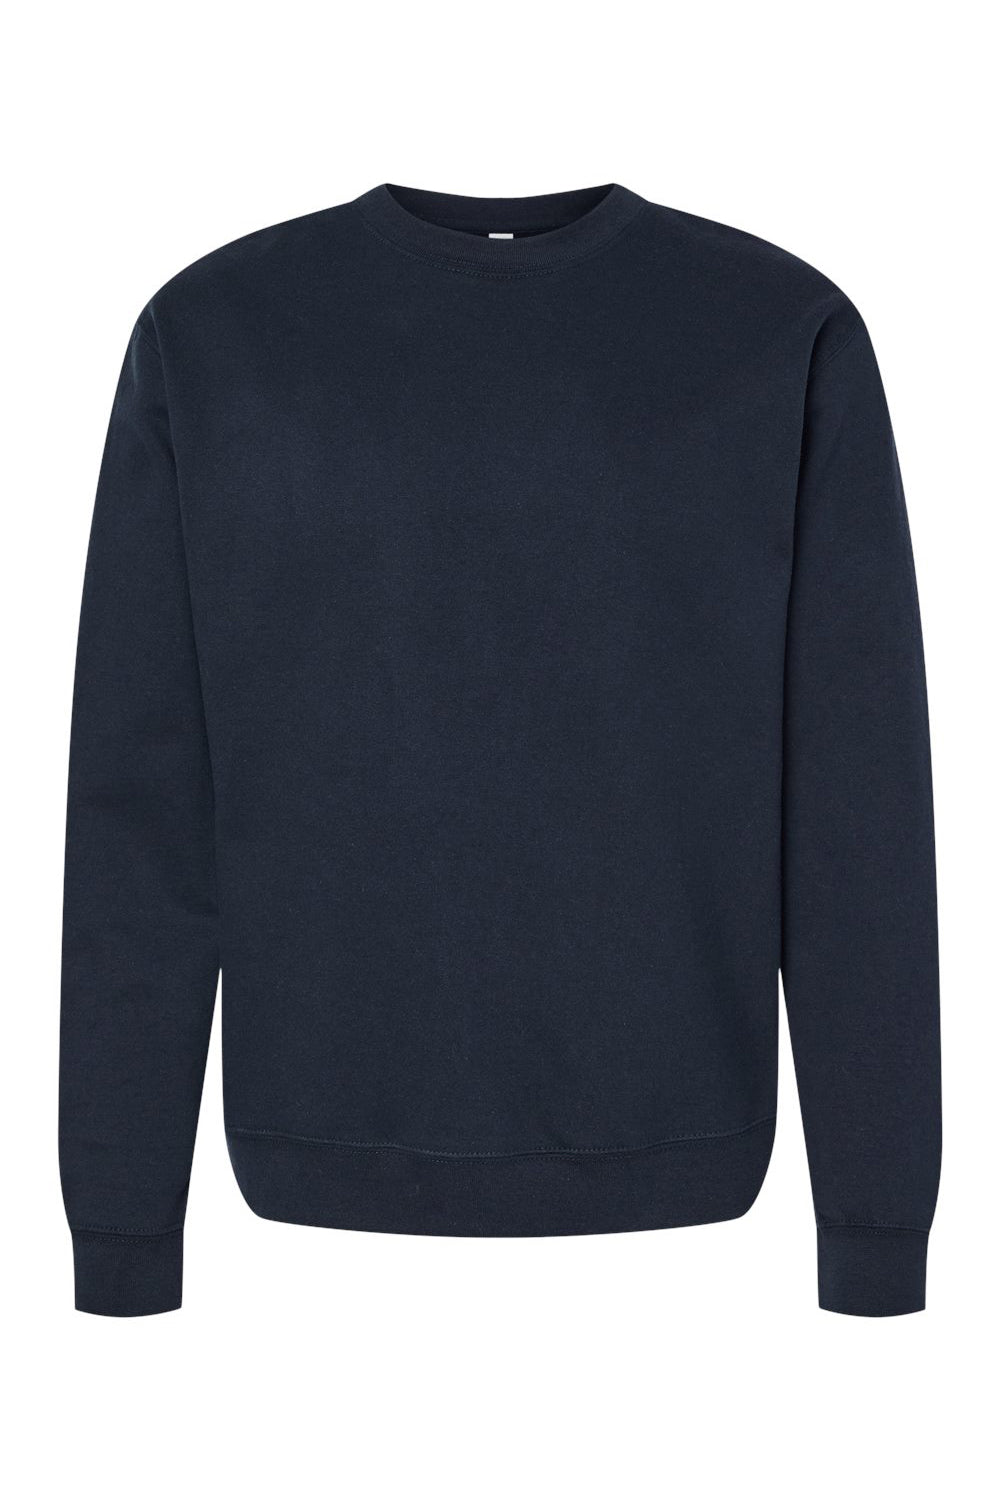 Independent Trading Co. SS3000 Mens Crewneck Sweatshirt Classic Navy Blue Flat Front